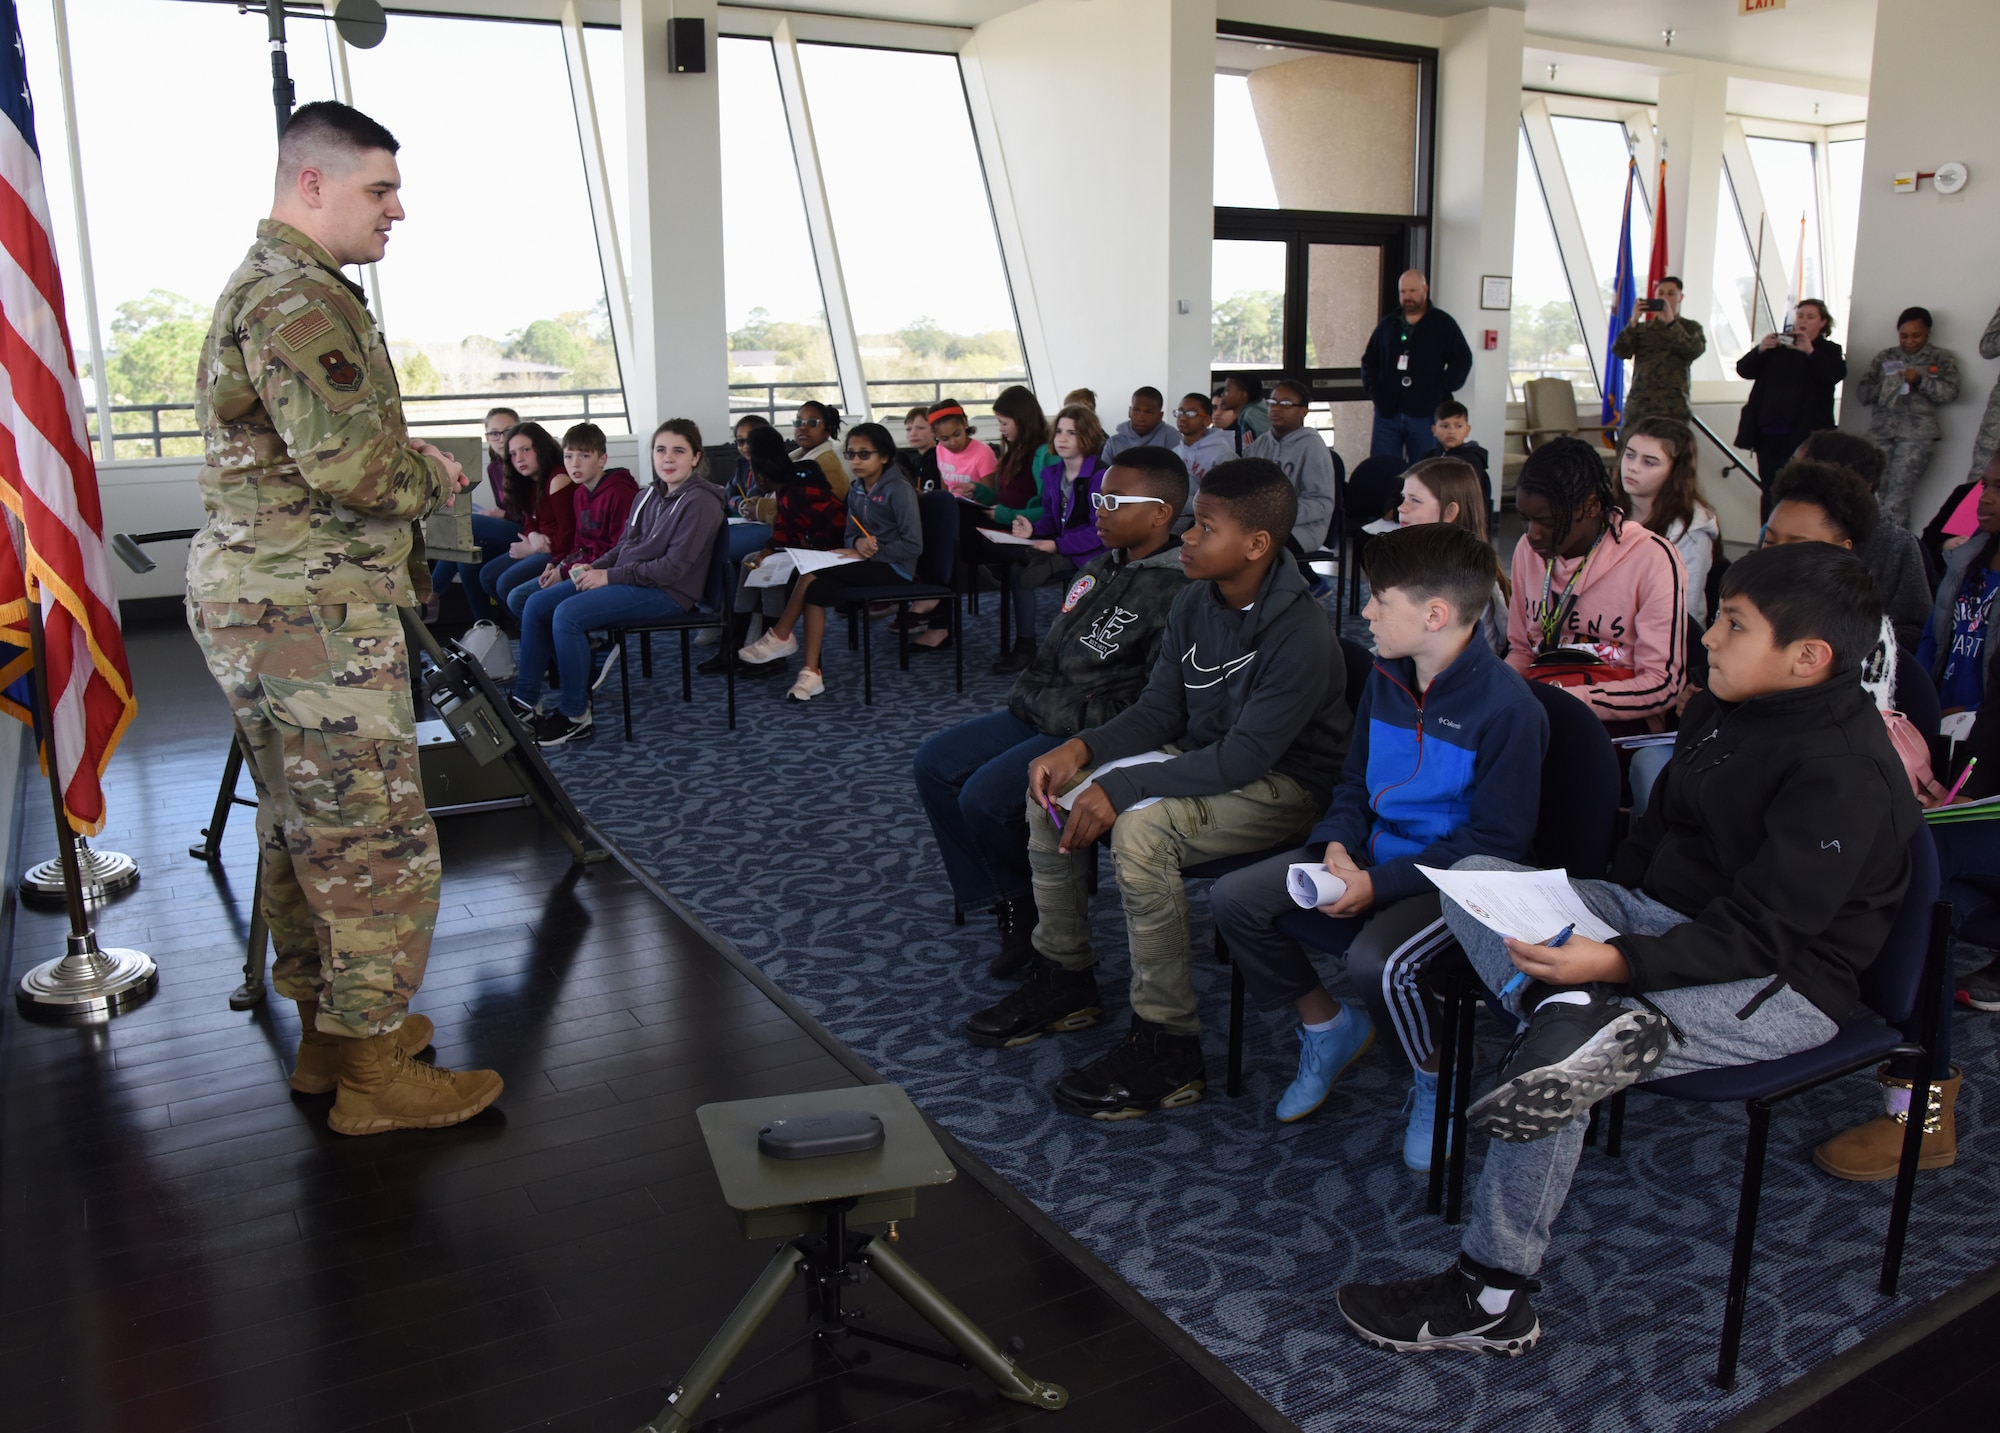 U.S. Air Force Staff Sgt. Christopher Spears, 335th Training Squadron instructor, provides a weather training briefing to school-aged children during Biloxi School District Career Exploration Day on Keesler Air Force Base, Mississippi, March 7, 2019. The children also toured the Keesler Fire Department, 334th TRS air traffic control school and received a demonstration from the 81st Security Forces Squadron military working dogs. (U.S. Air Force photo by Kemberly Groue)